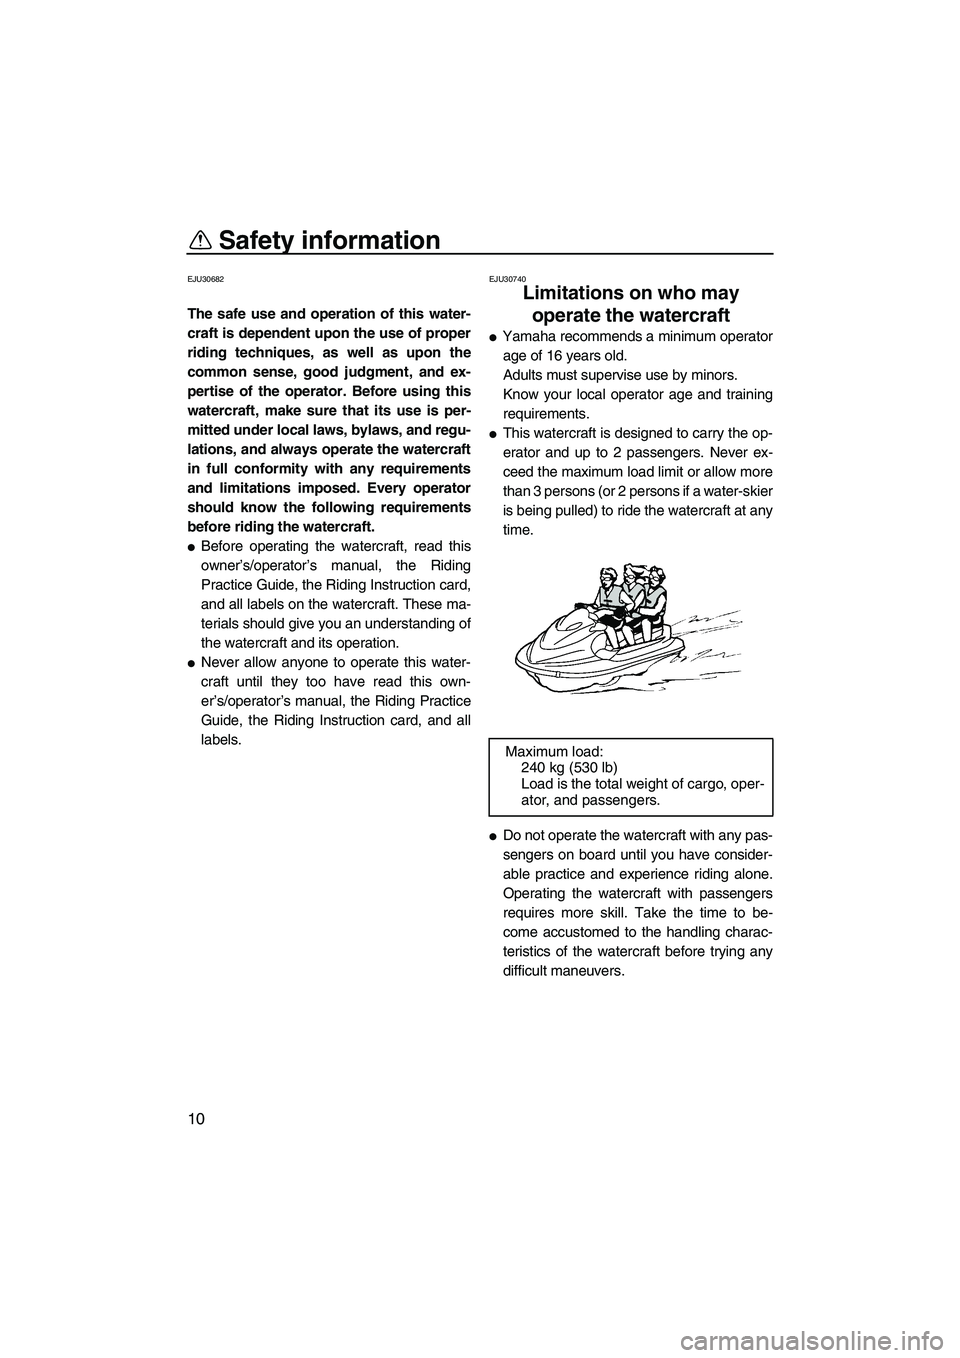 YAMAHA VXS 2012 User Guide Safety information
10
EJU30682
The safe use and operation of this water-
craft is dependent upon the use of proper
riding techniques, as well as upon the
common sense, good judgment, and ex-
pertise o